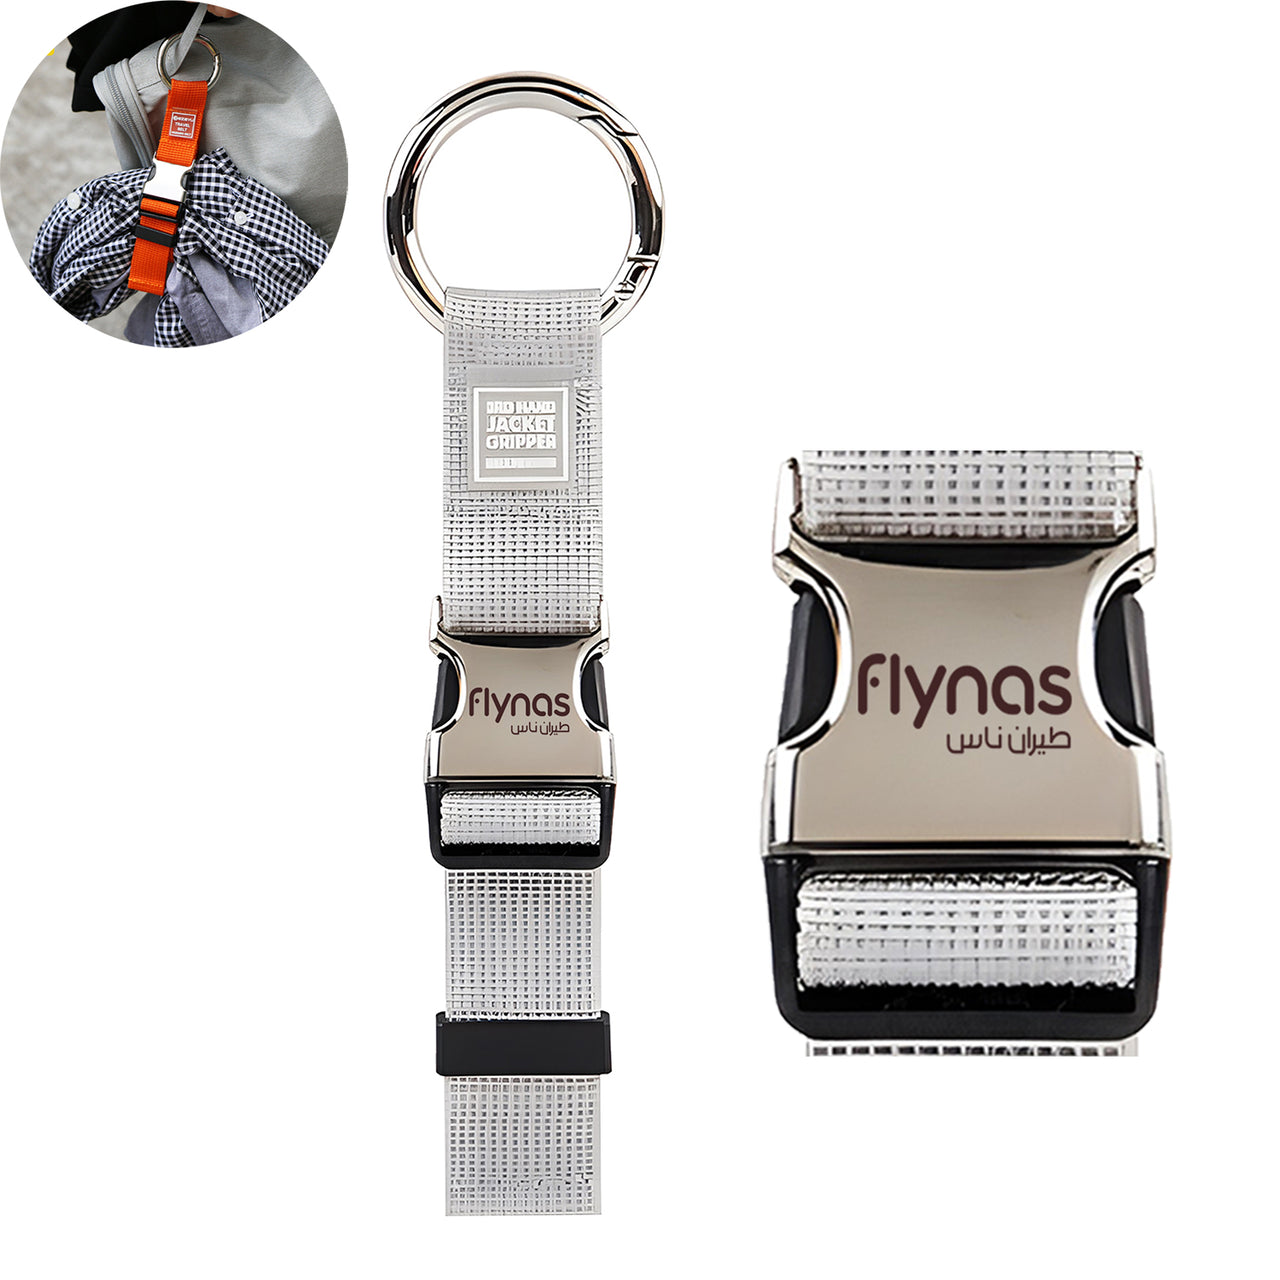 Flynas Airlines Designed Portable Luggage Strap Jacket Gripper